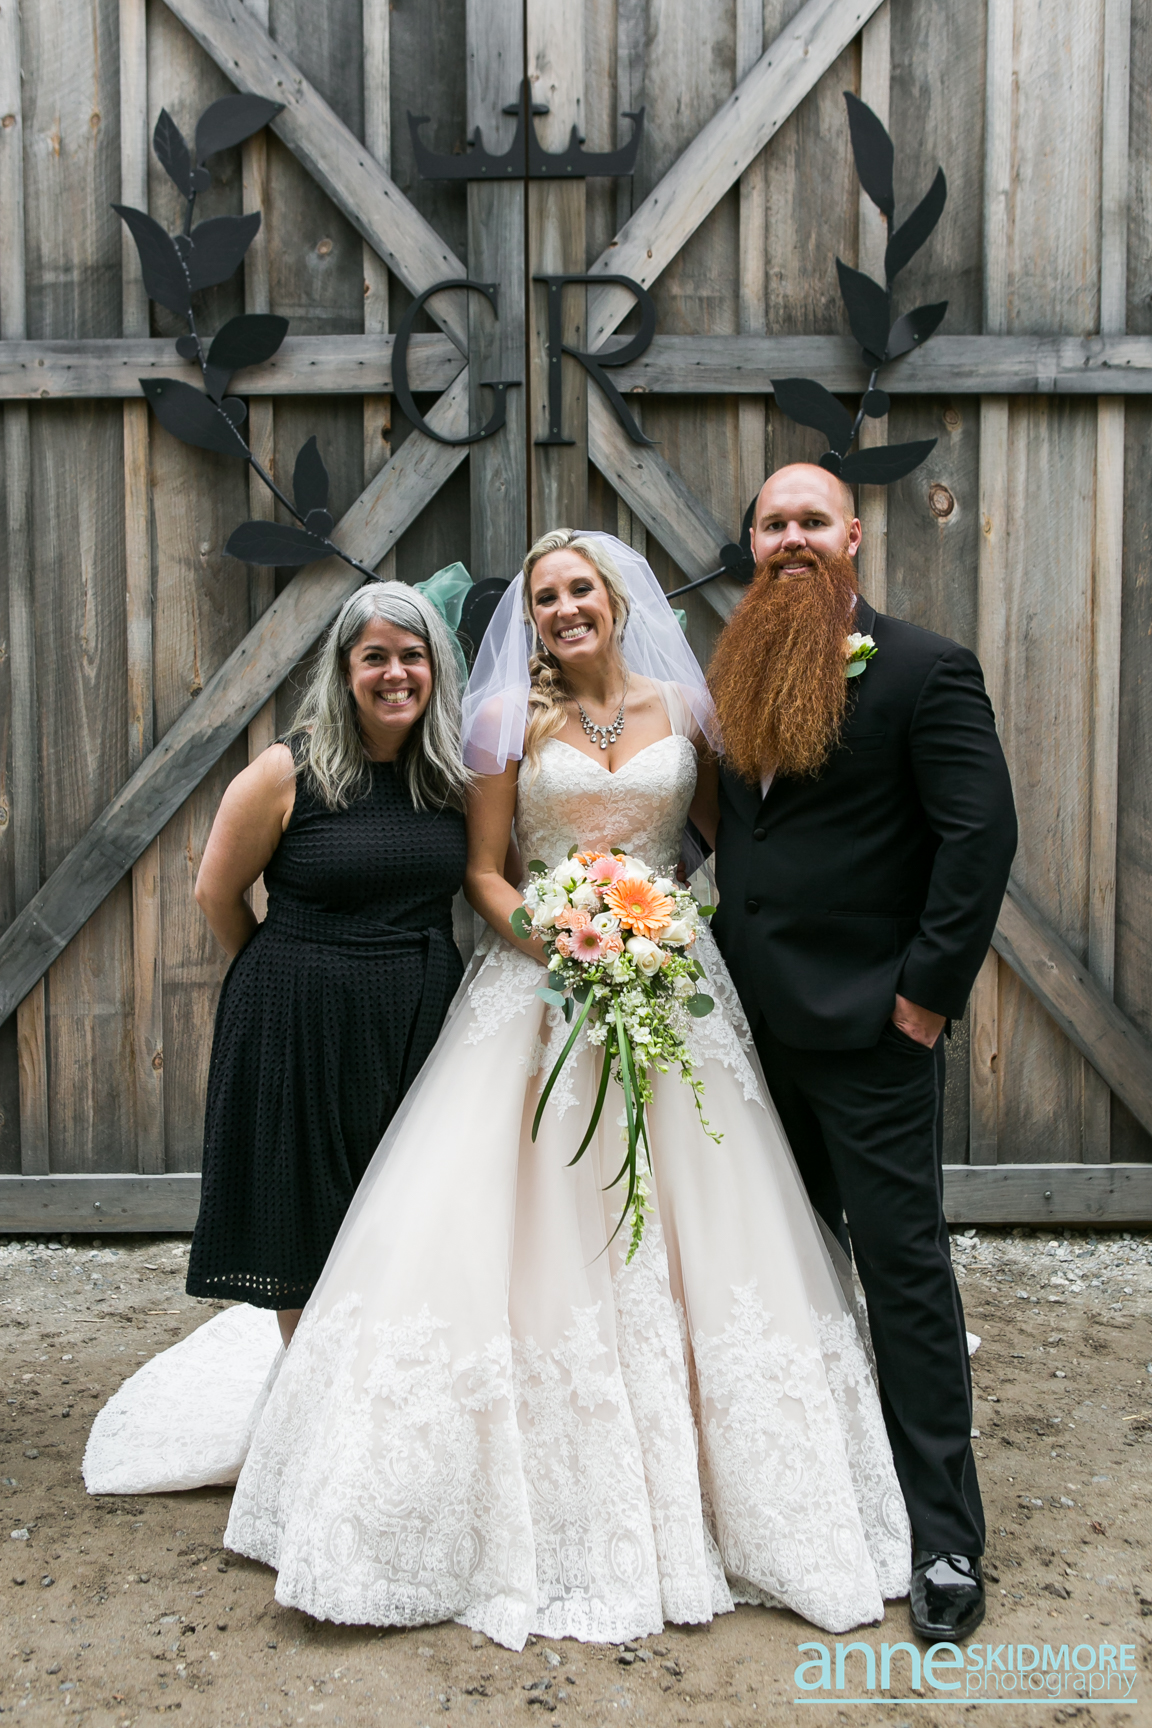 Norway Maine wedding officiant | Photo by Anne Skidmore Photography